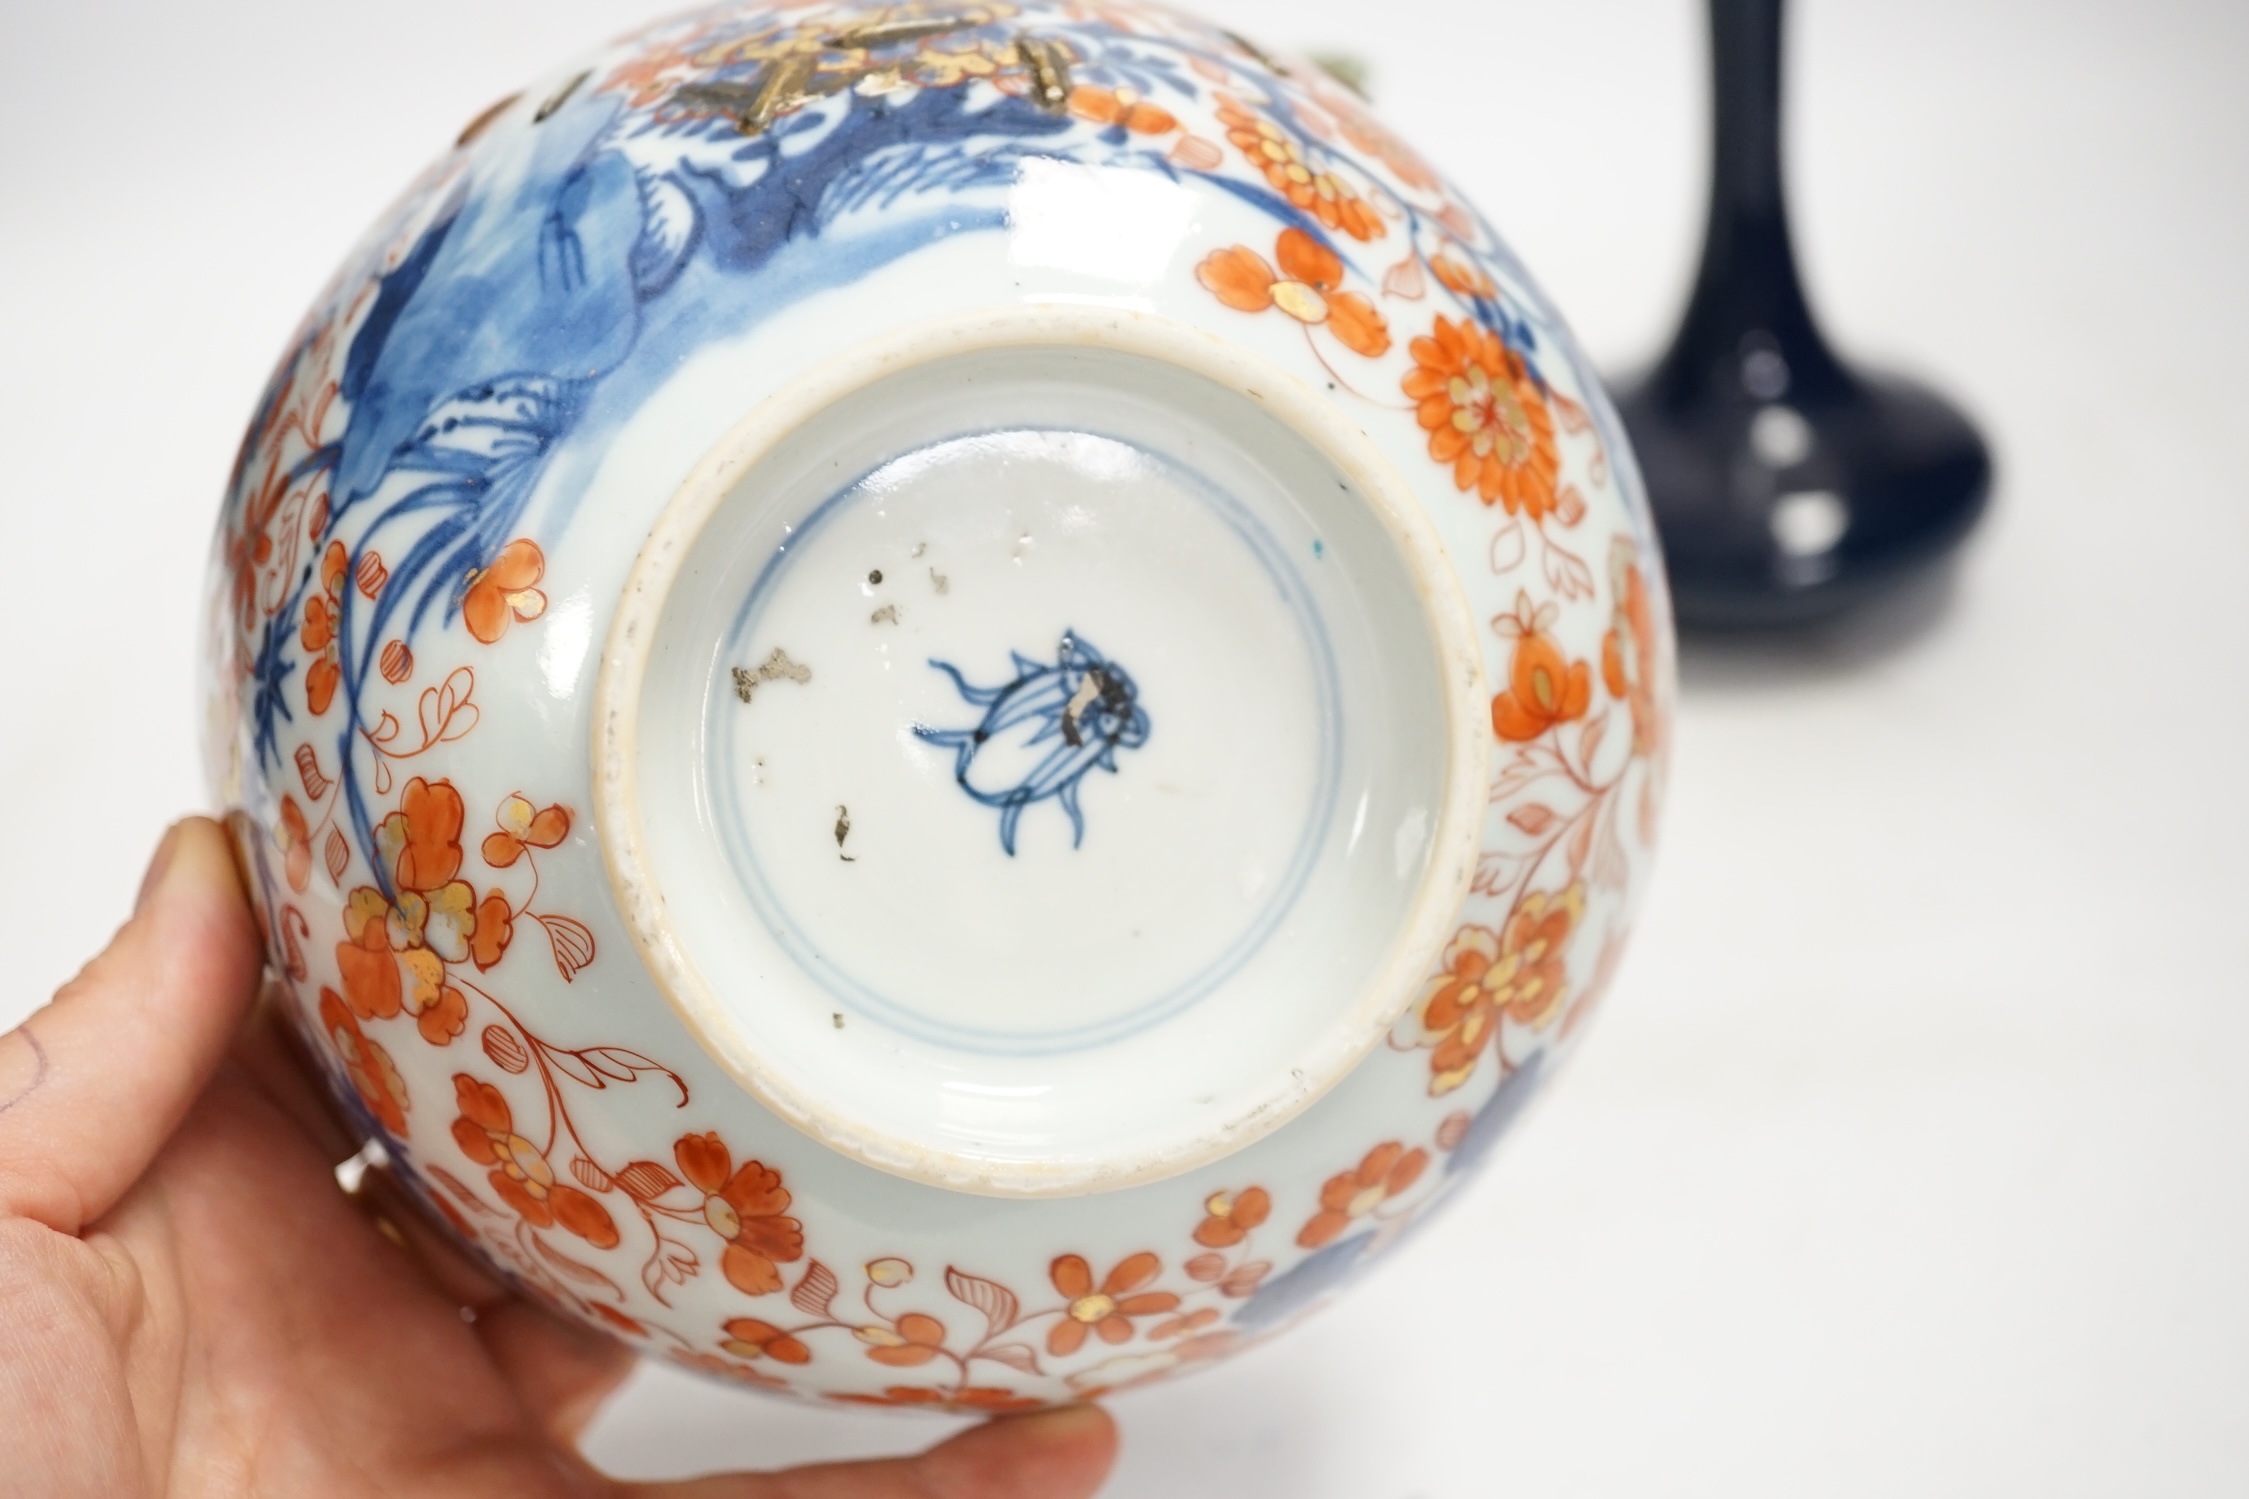 A Chinese famille rose bowl, an Imari patterned bowl, a small blue glazed vase and a similar celadon glazed vase, 18th century and later. Condition - both bowls badly cracked, overall poor